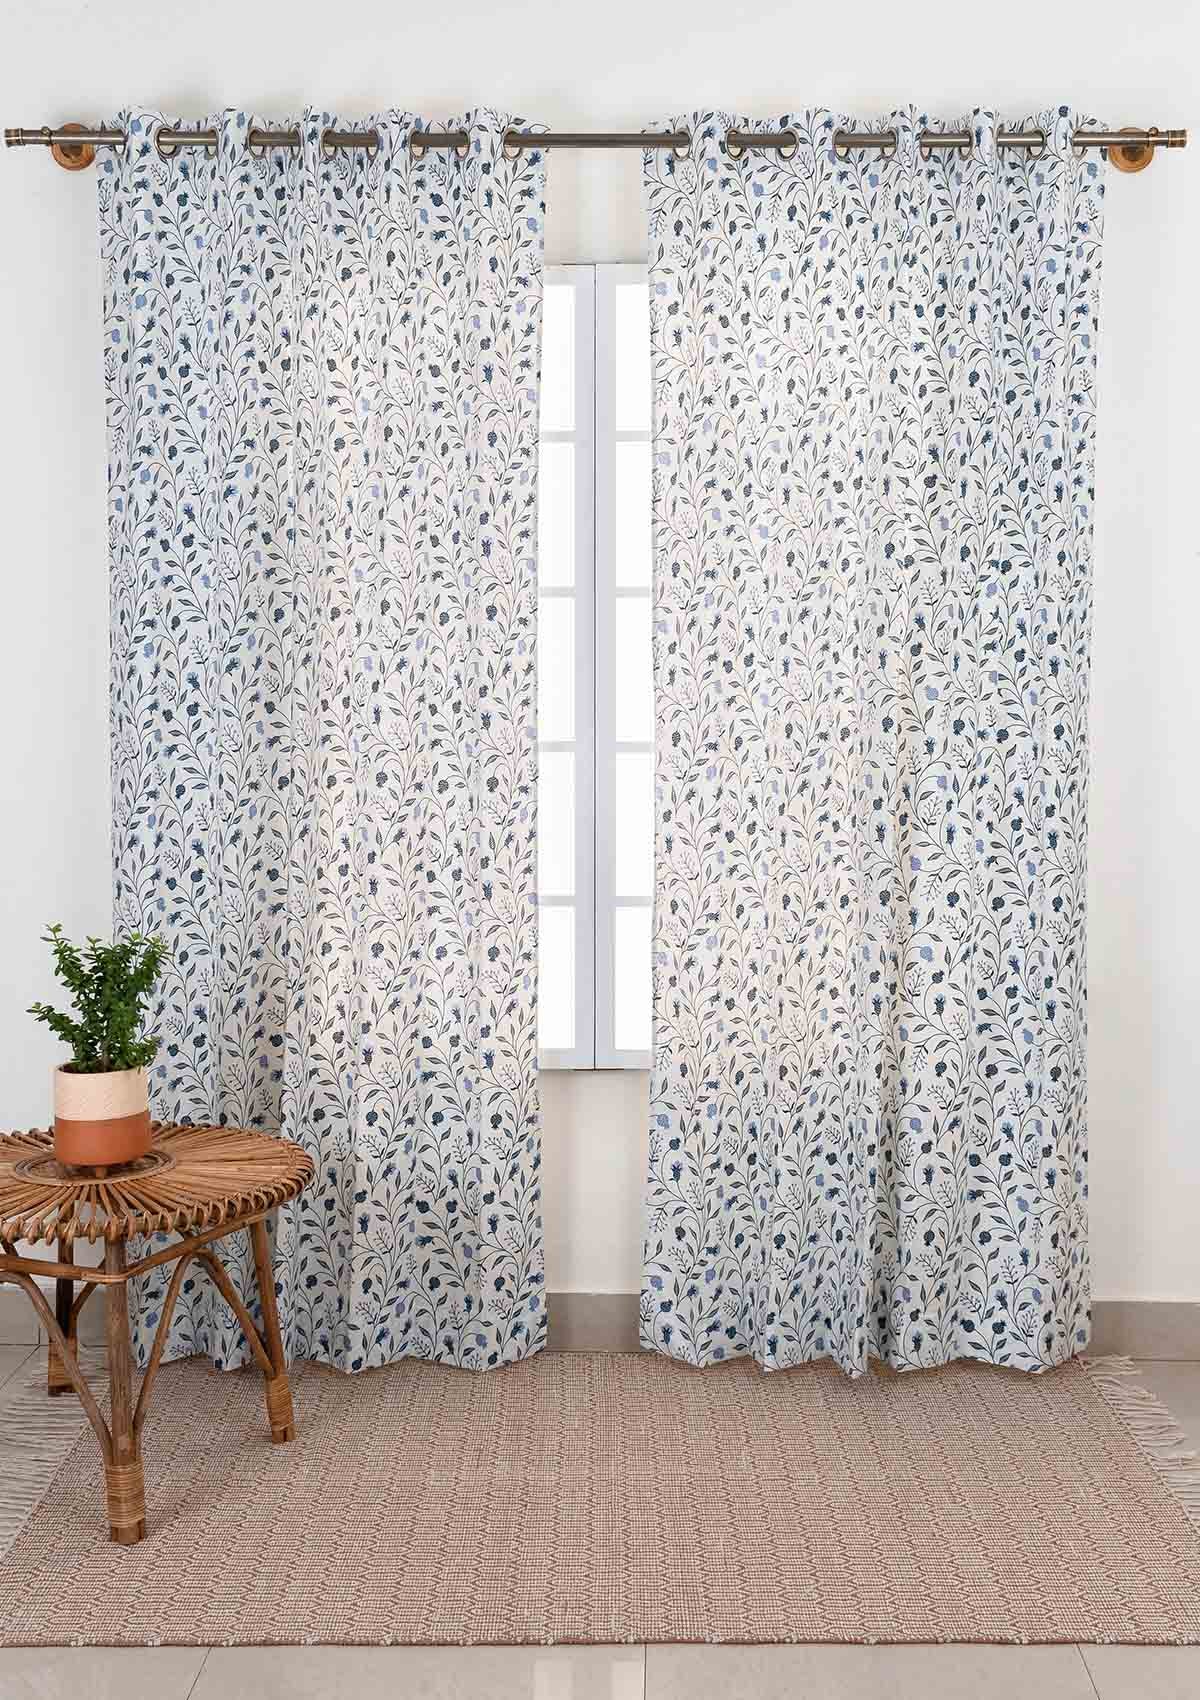 Blue Ruby 100% Customizable Cotton floral curtain for living room - Room darkening - Indigo